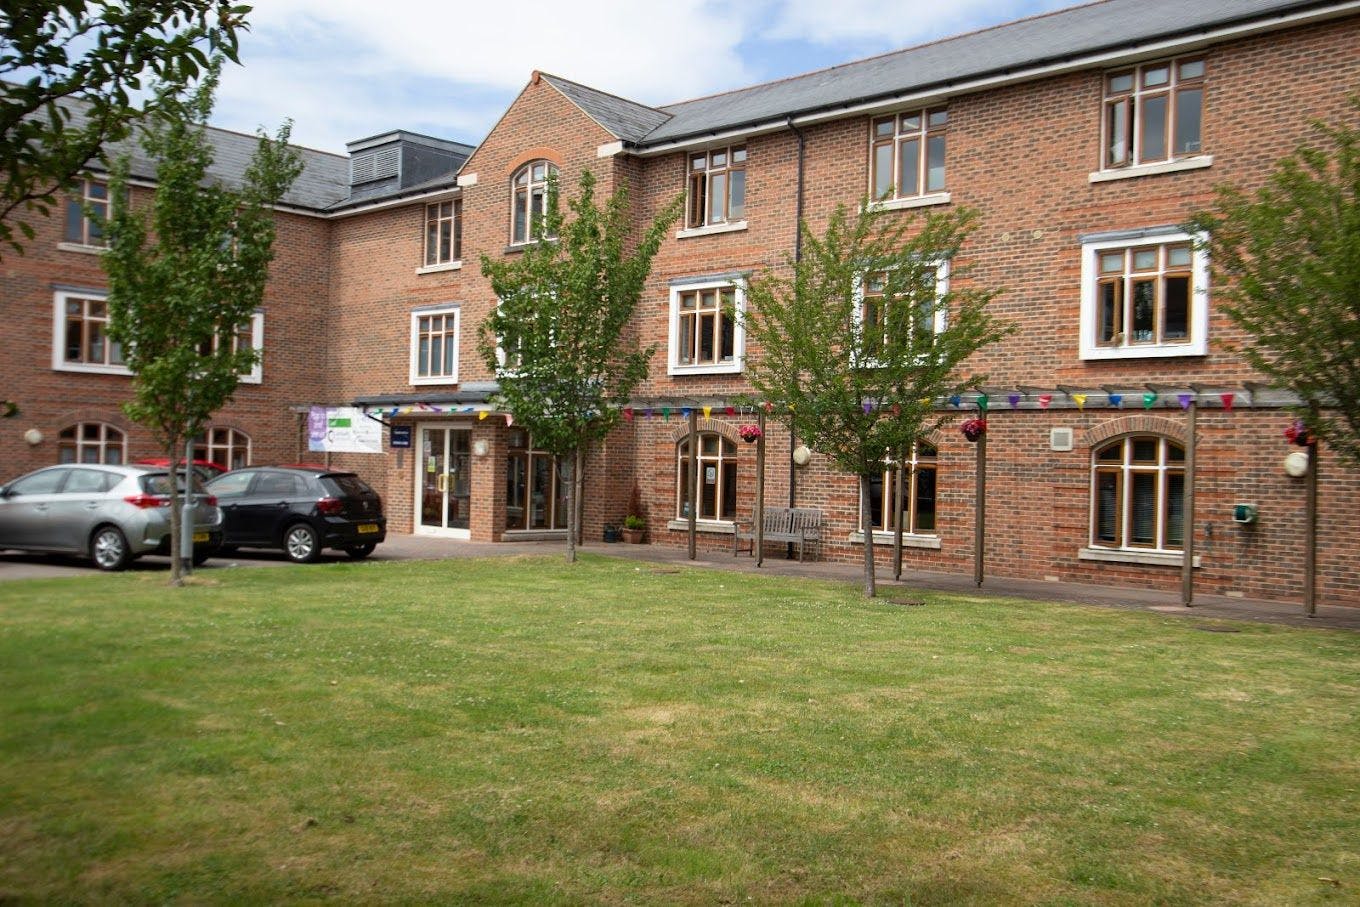 Shaw Healthcare - Rotherlea care home 006